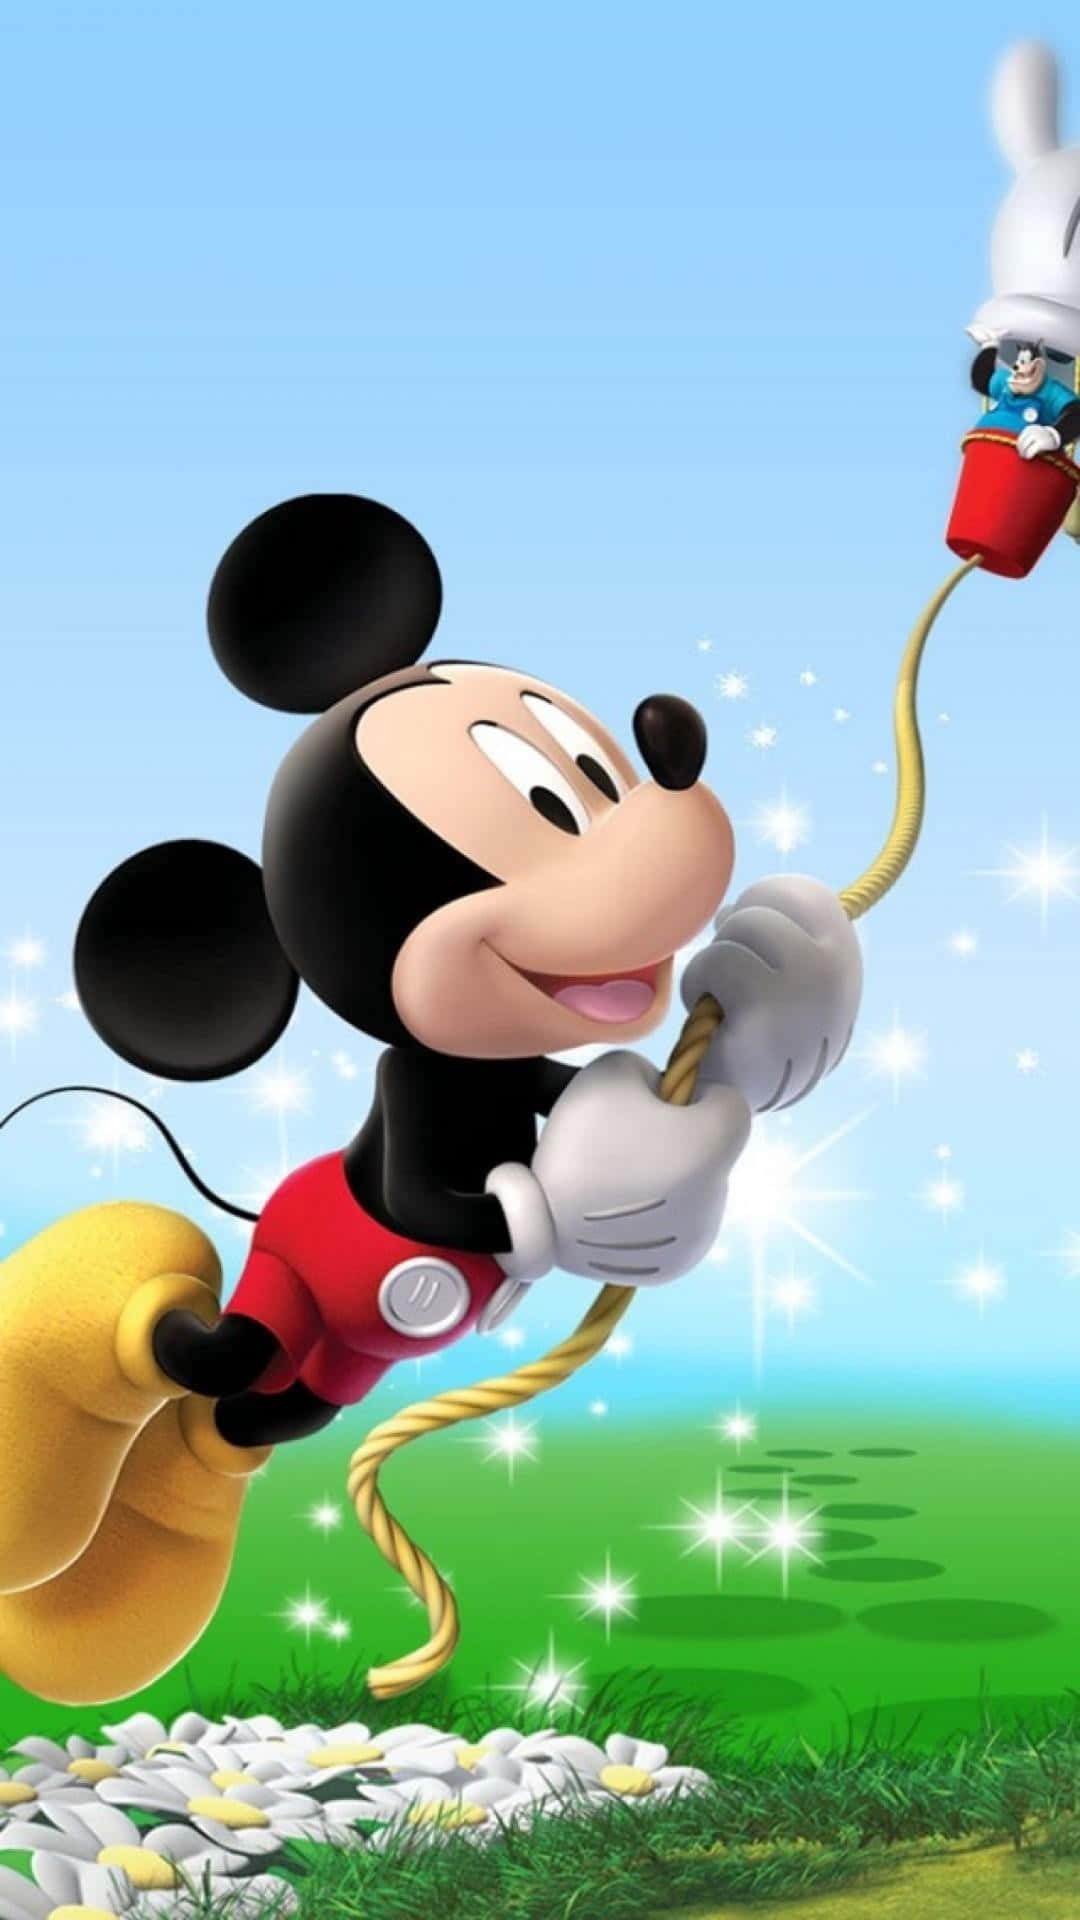 Nyd Disney On The Go med iPhone 7-tapet. Wallpaper